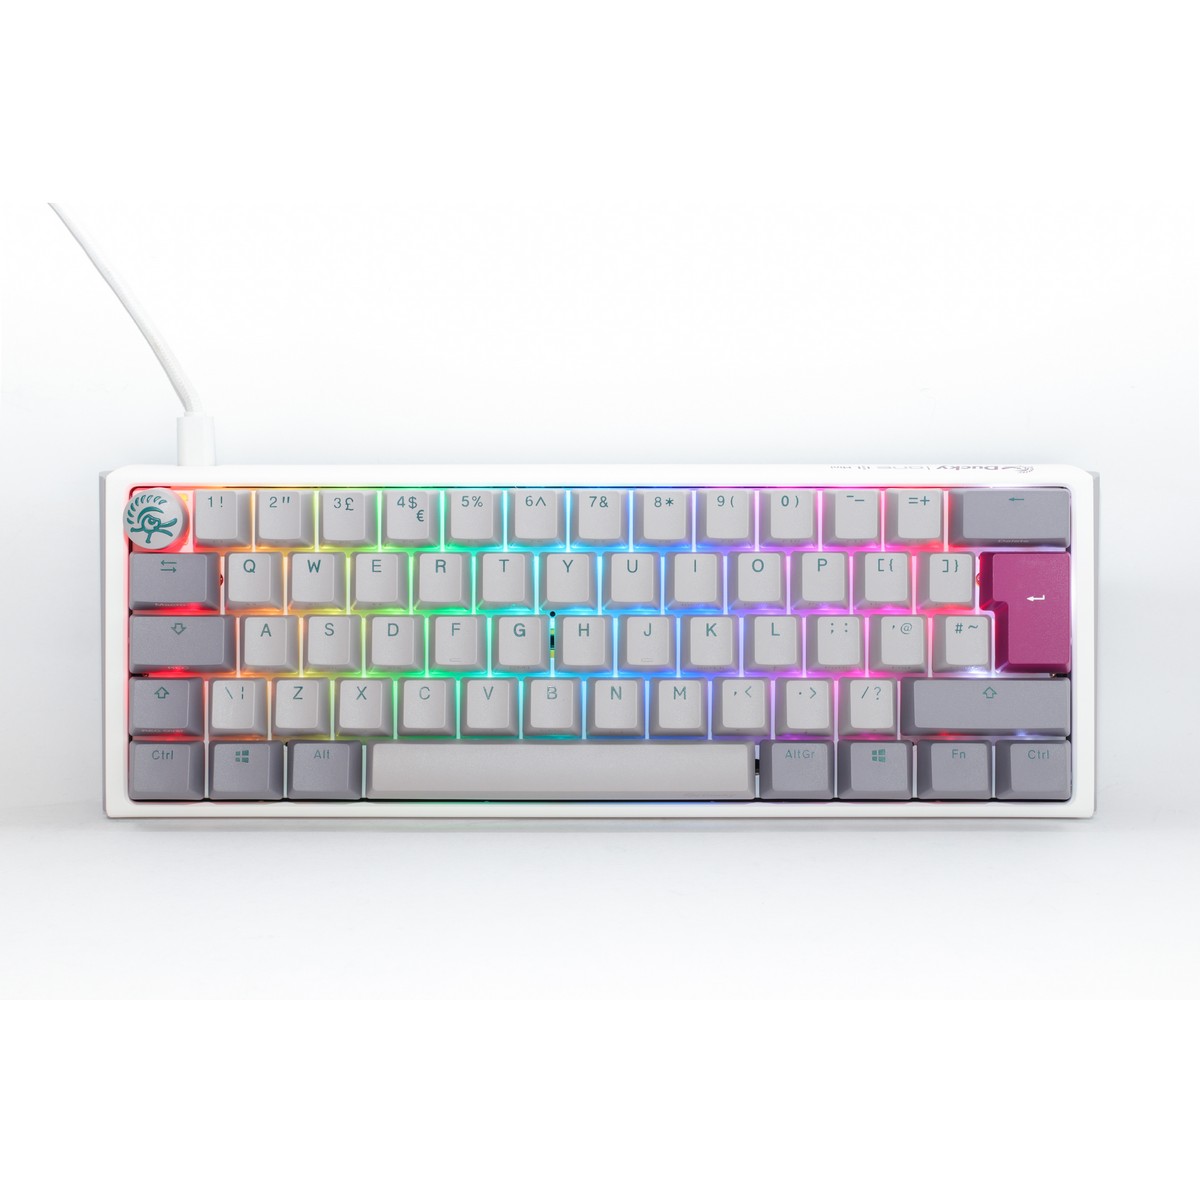 Ducky One 3 Mist Mini 60% USB RGB Mechanical Gaming Keyboard Cherry MX Silent Red Switch - UK Layout